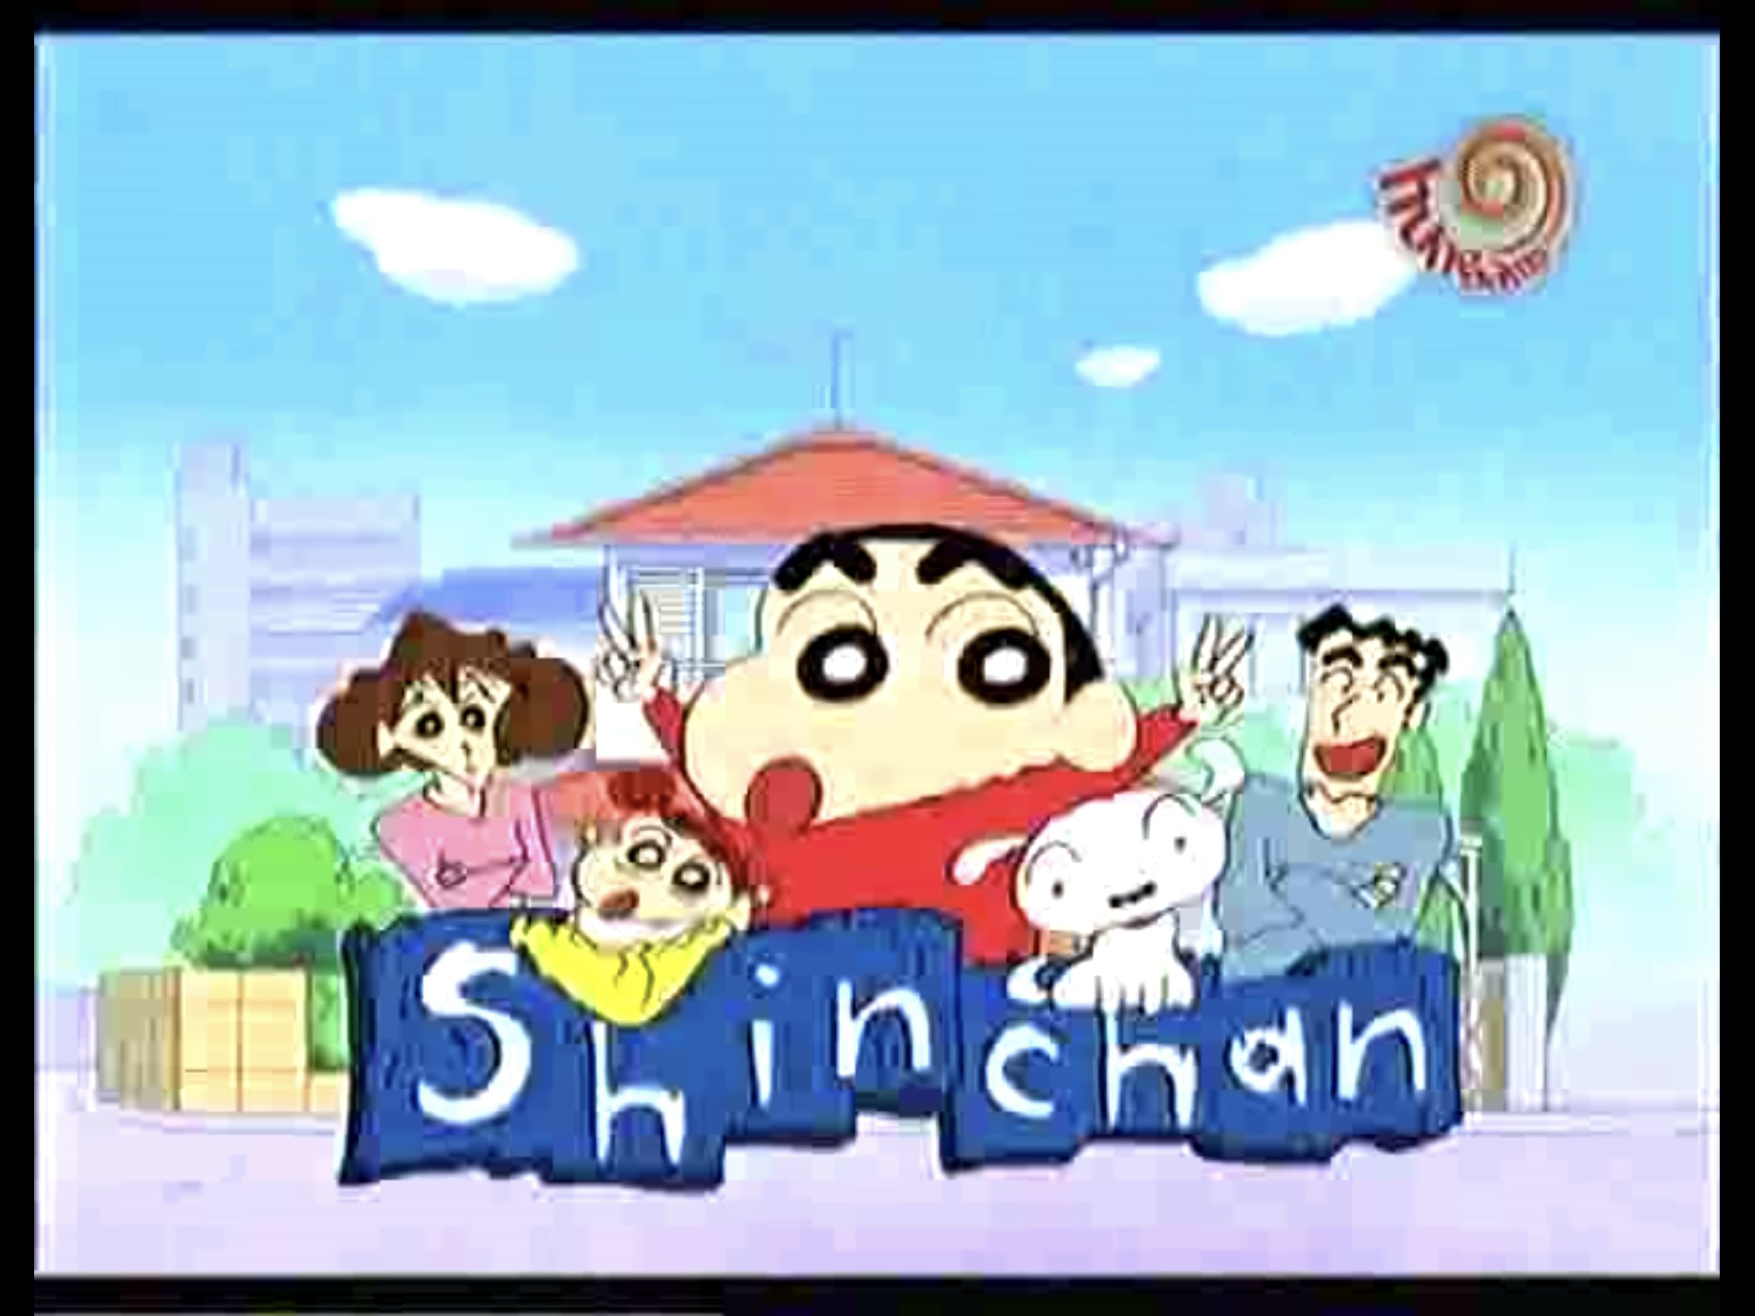 https://static.wikia.nocookie.net/lostdubbing/images/d/d7/Crayon_Shin-chan_-_title_card_%28Hindi%29.png/revision/latest?cb=20221211013728